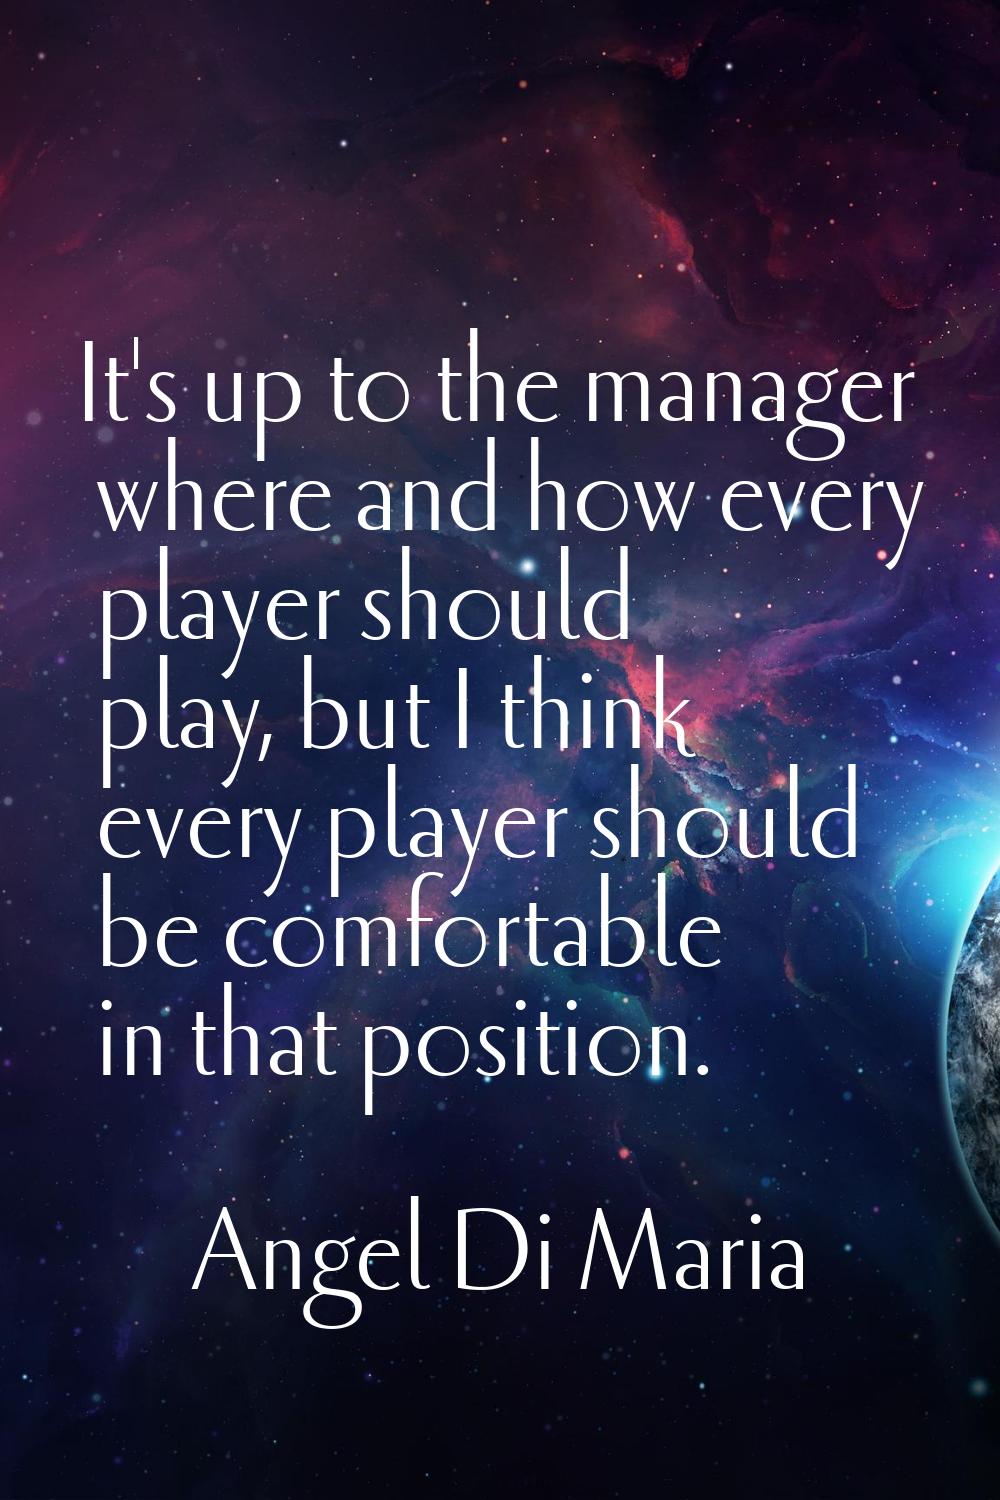 It's up to the manager where and how every player should play, but I think every player should be c